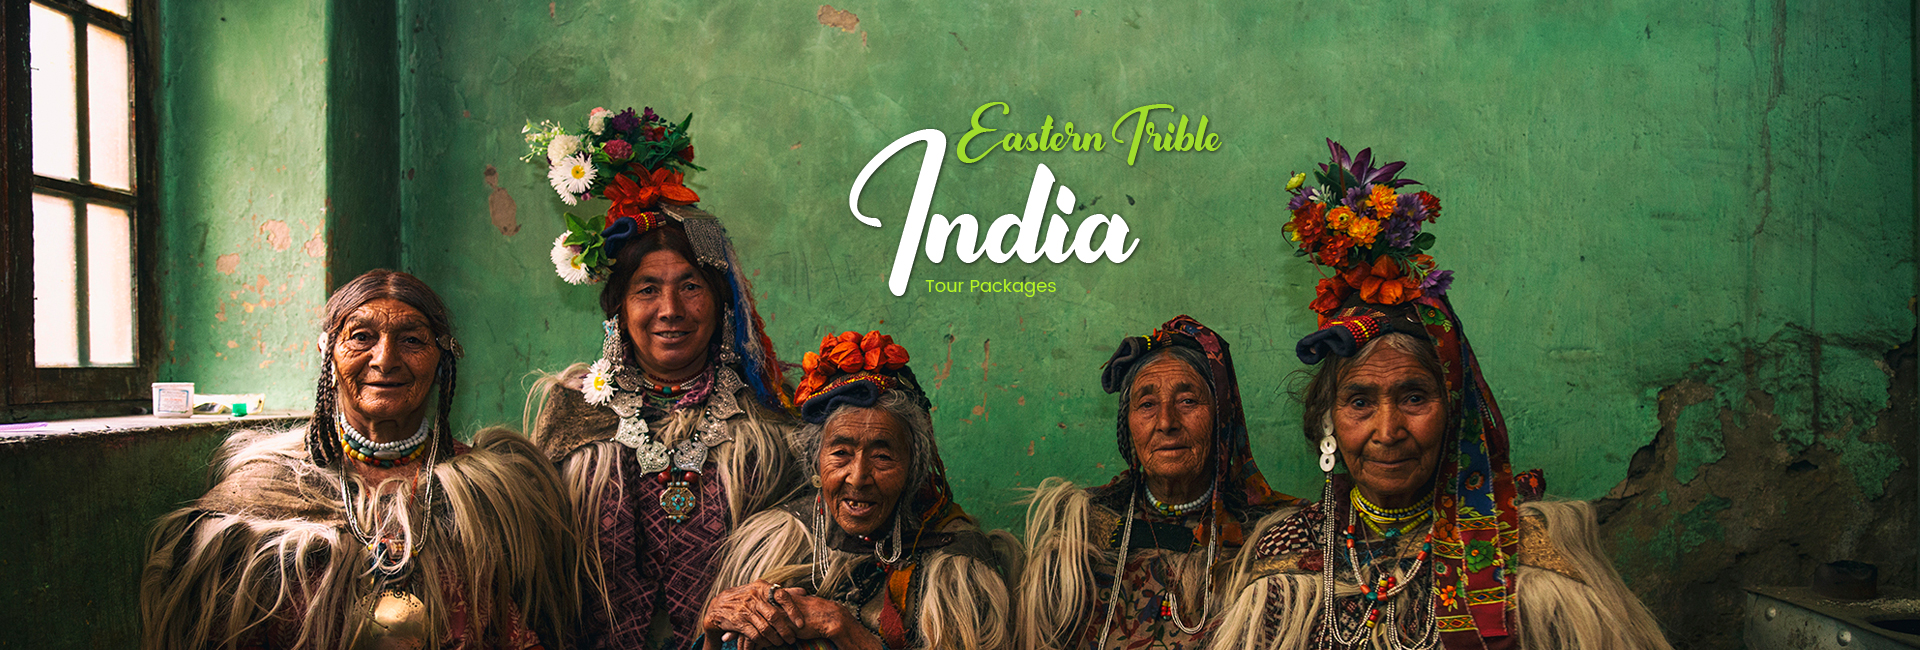 Eastern/Trible India Tours